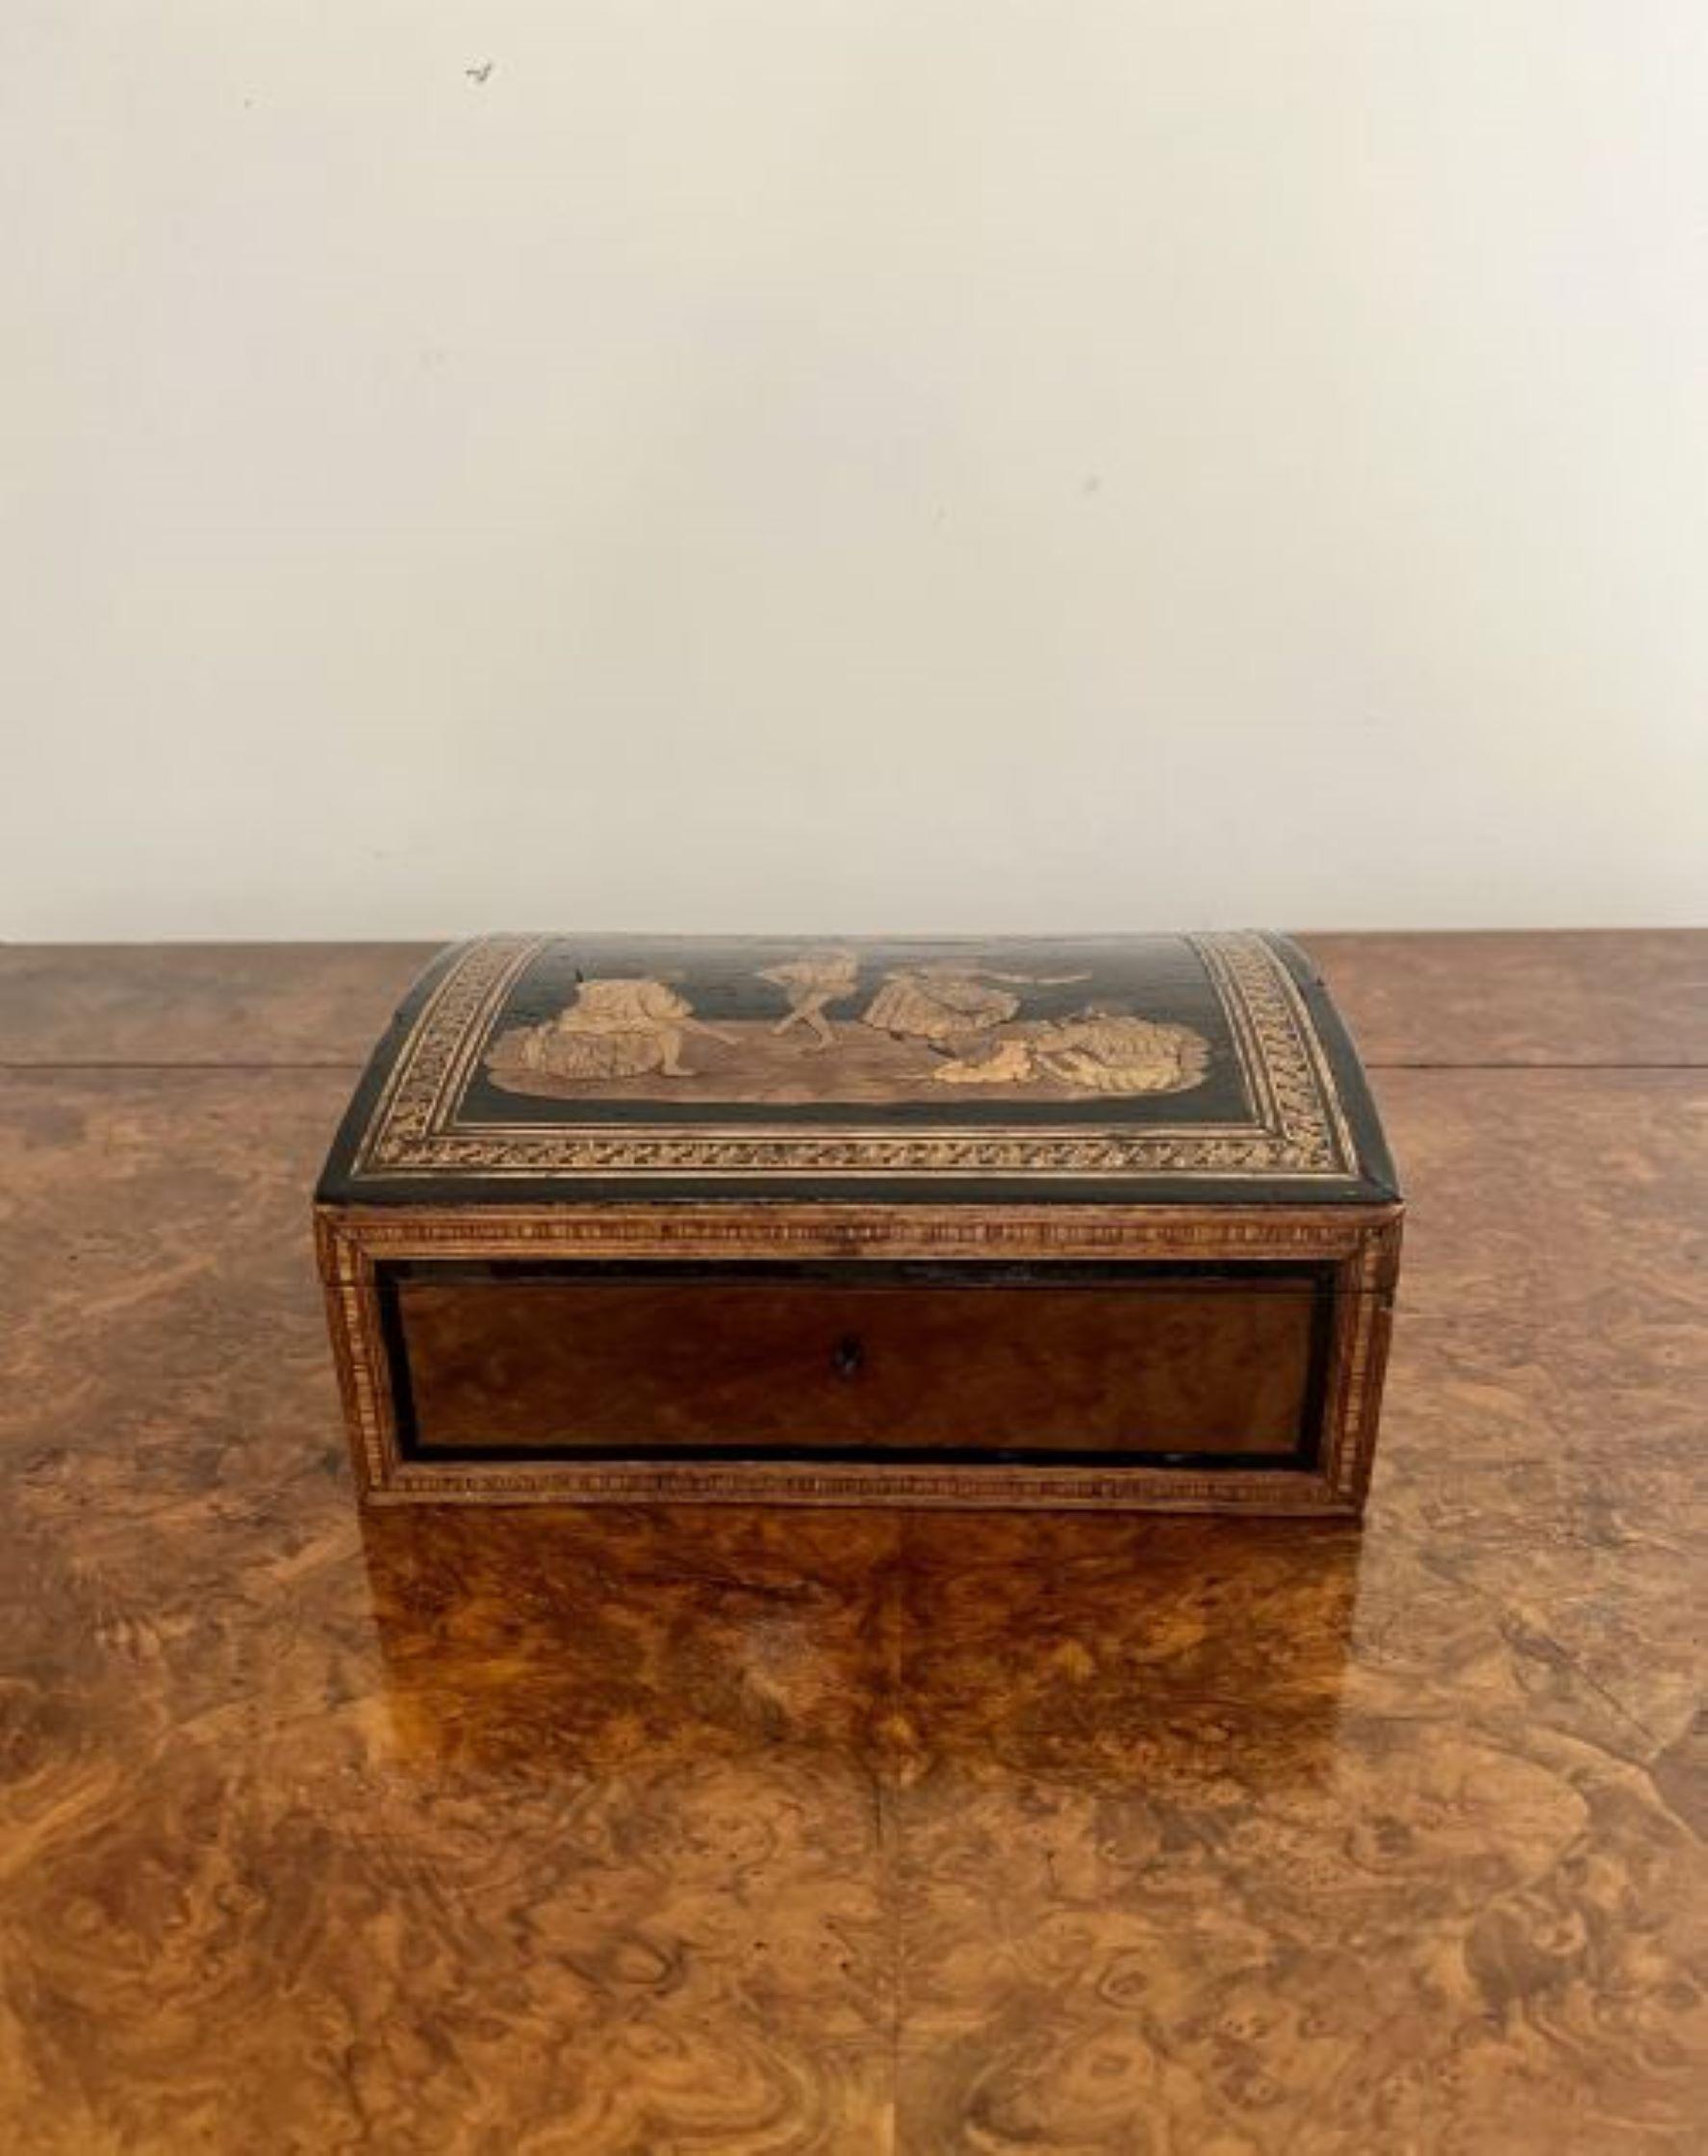 Superb quality antique Victorian walnut marquetry inlaid box having a superb quality marquetry inlaid dome top opening to reveal a storage compartment